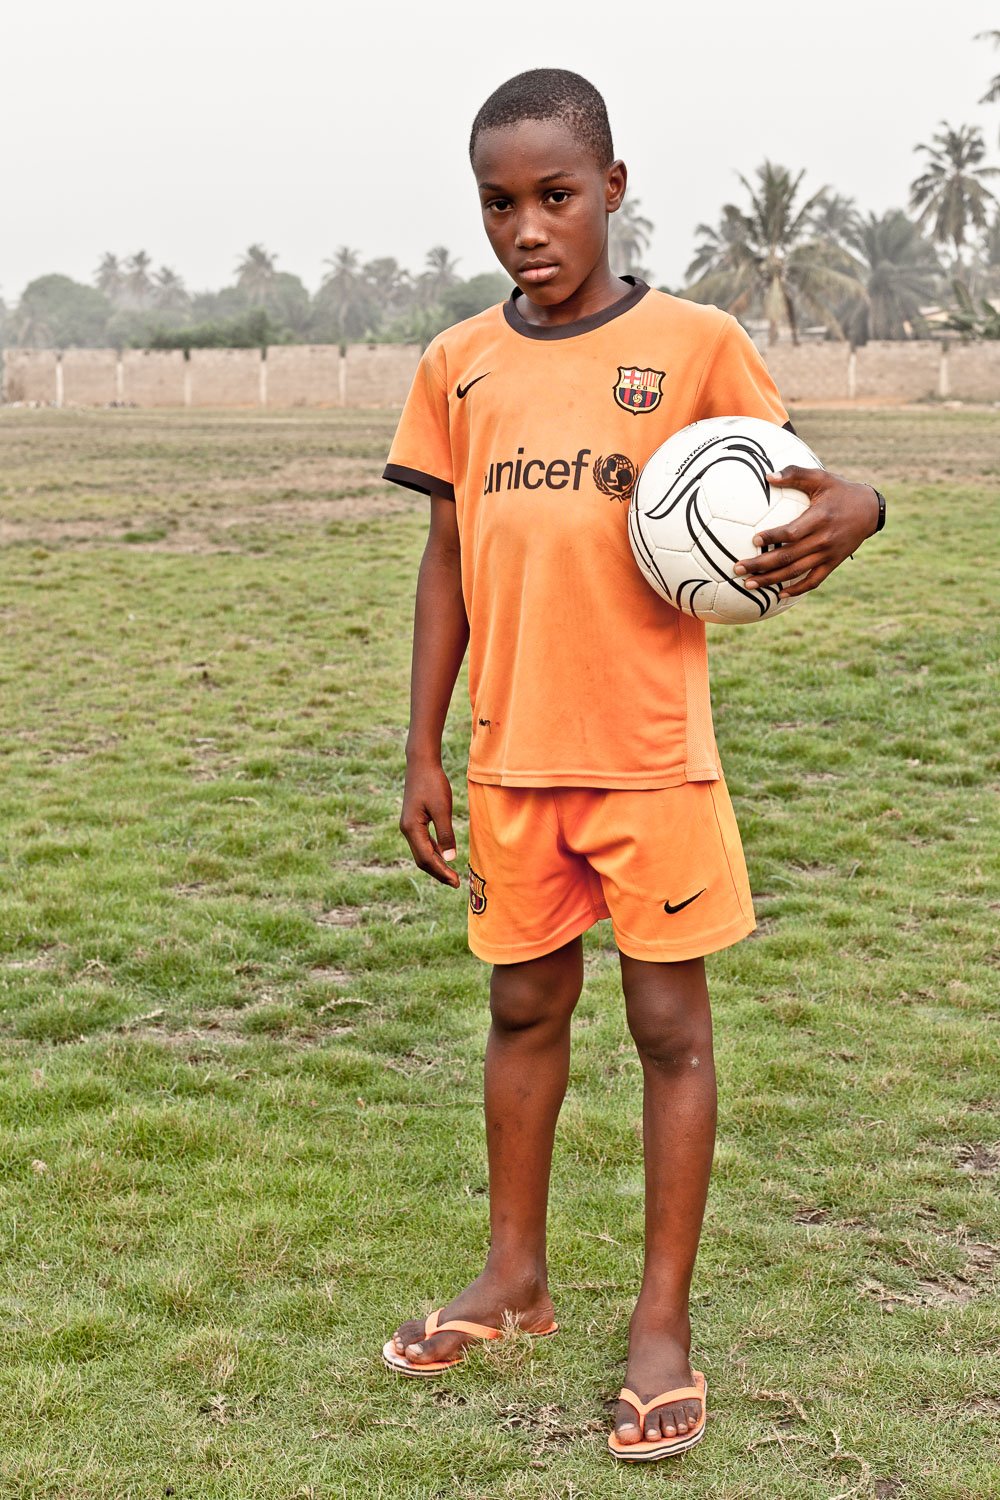  NAME: Kevin Kéke AGE: 12 CLUB: Liberty Academy POSITION: Right Wing HOMETOWN: Lomé, Togo 